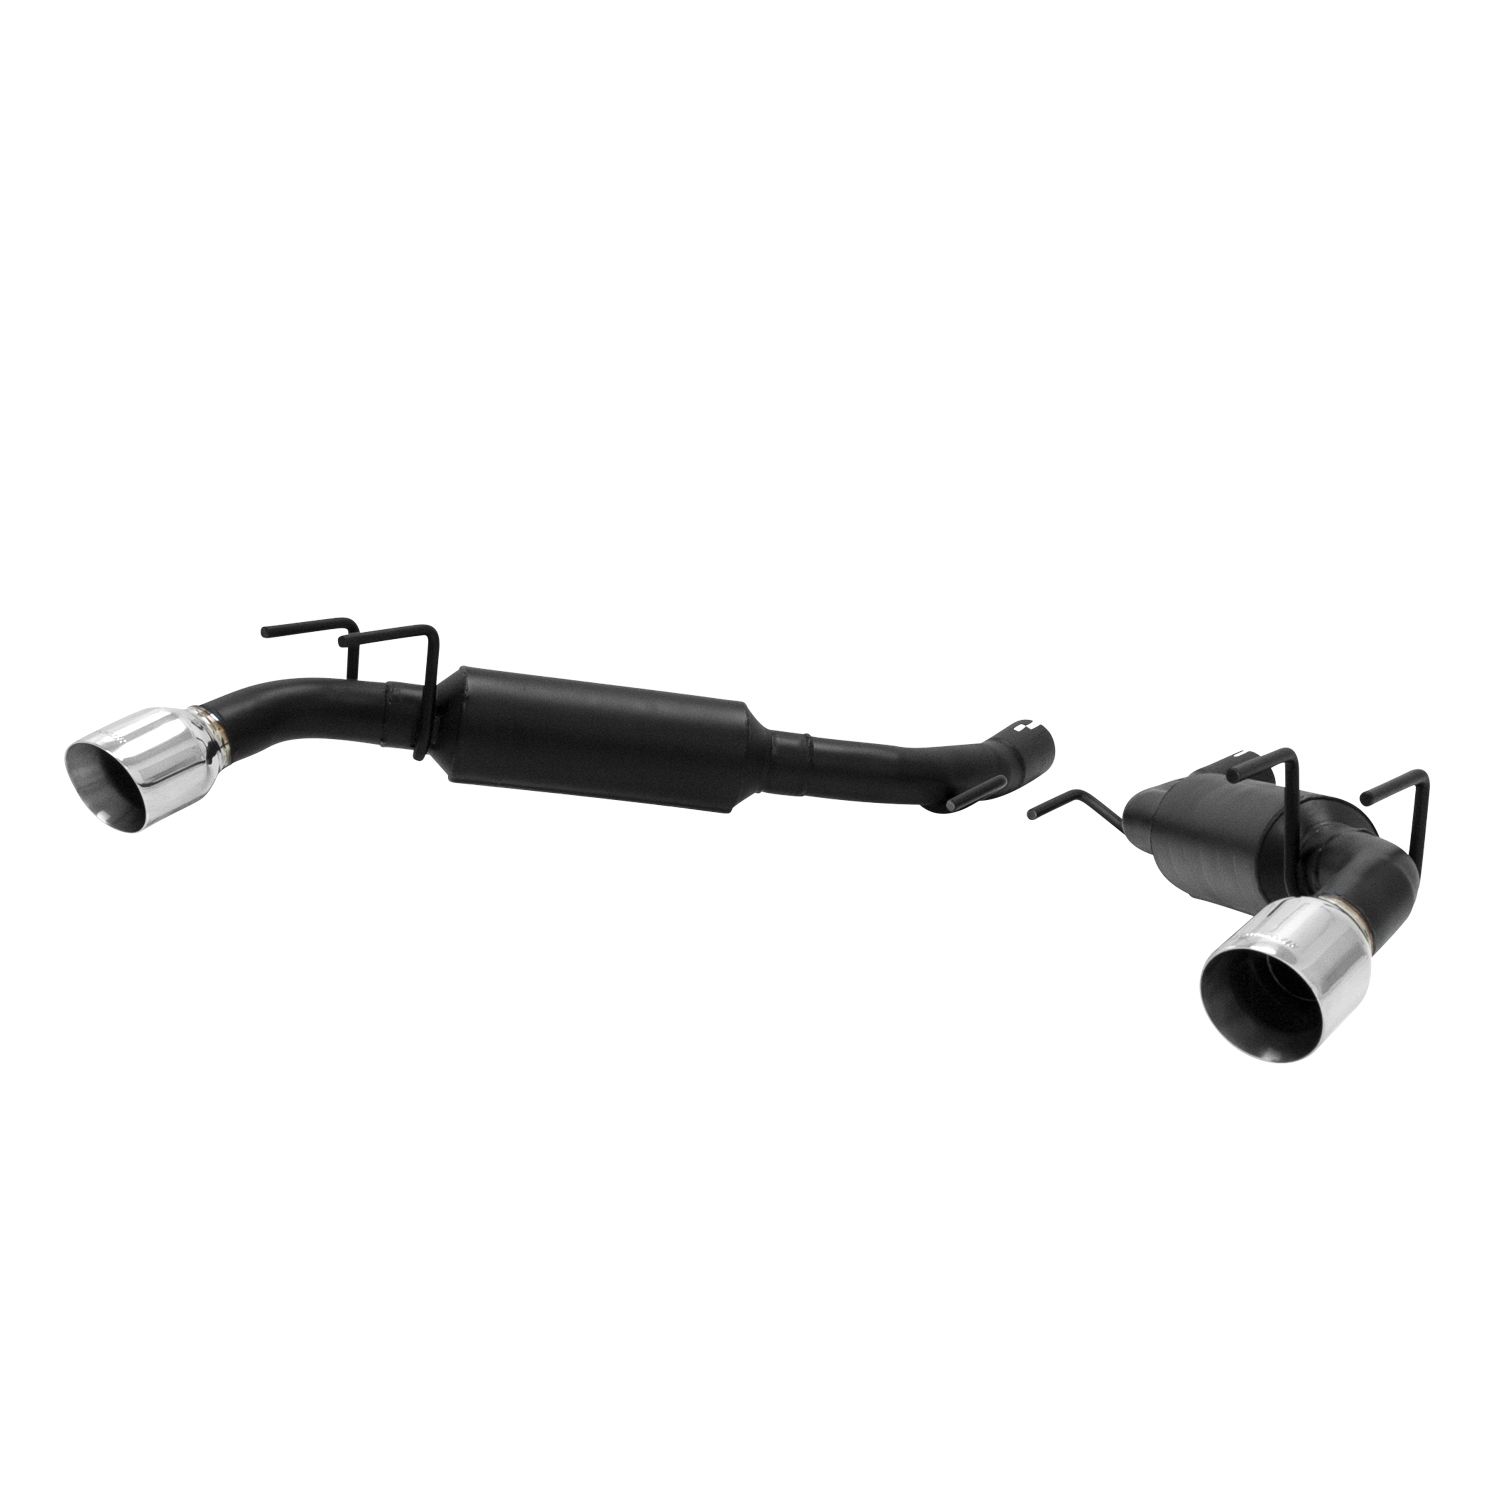 2014-2015 Chevrolet Camaro SS 6.2L Flowmaster Outlaw Axle-Back Exhaust - 817686